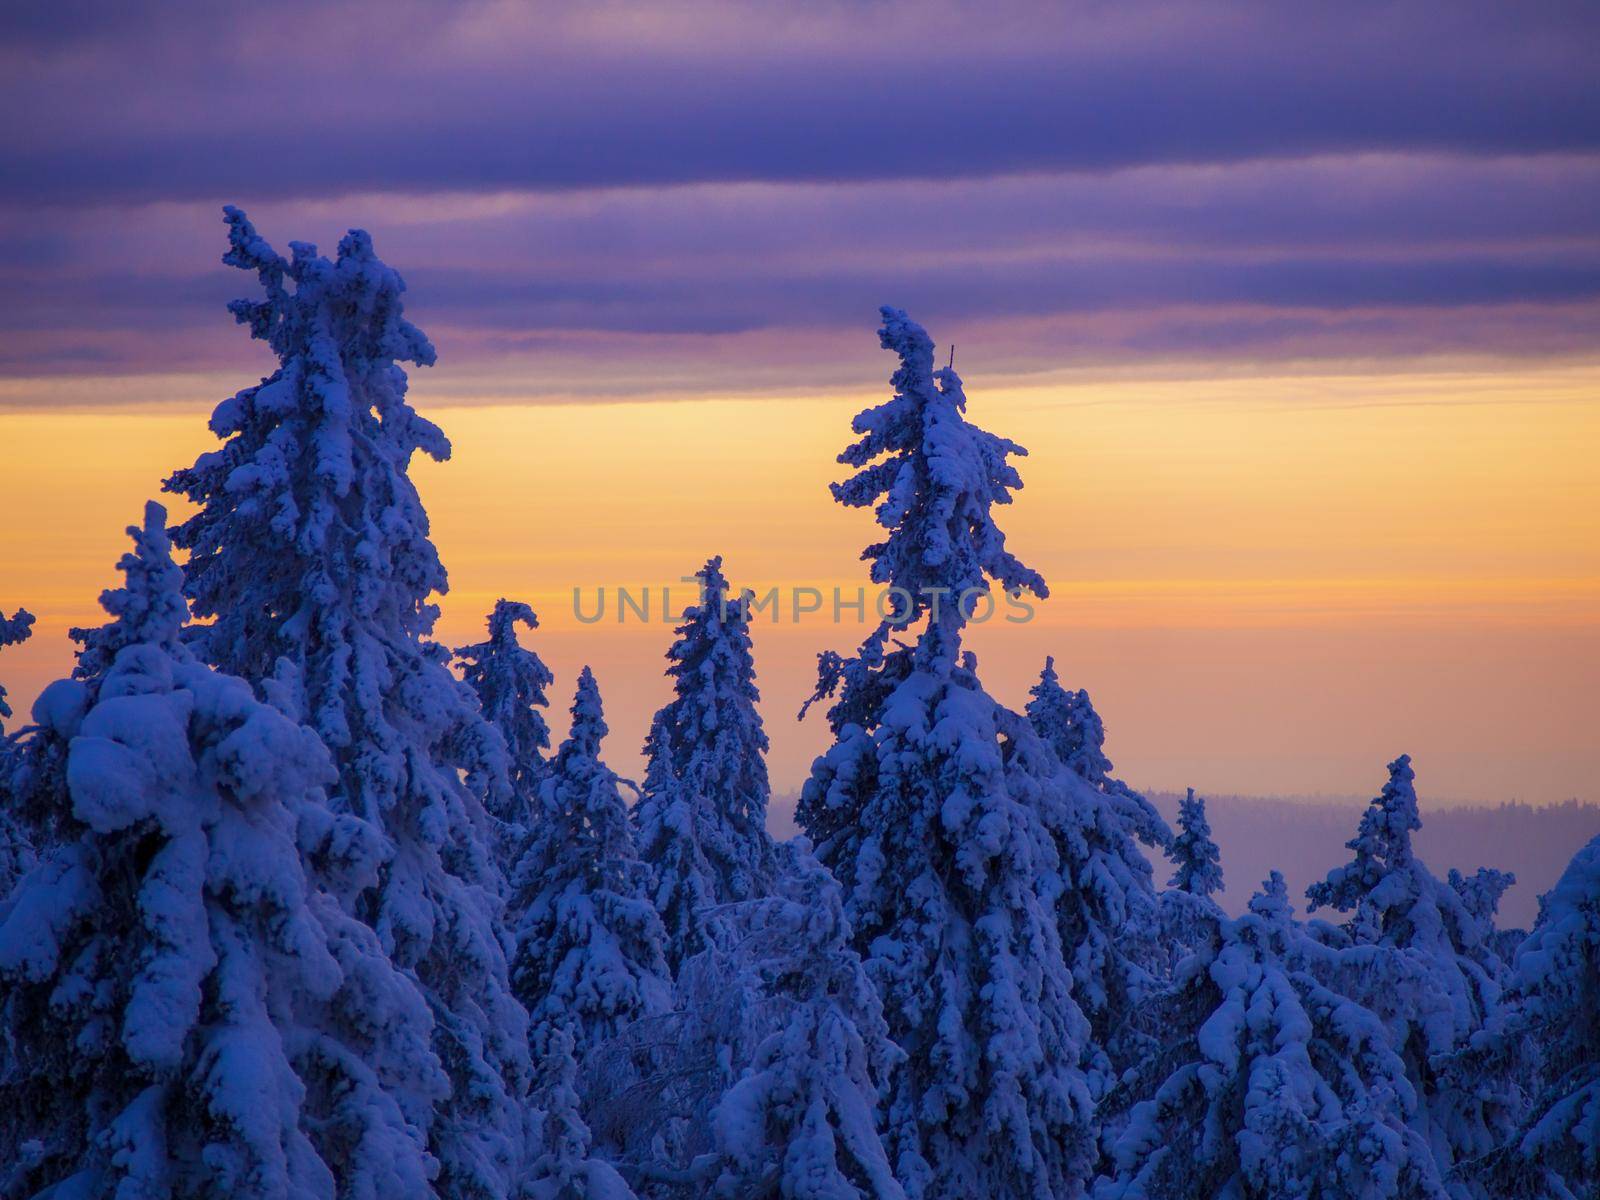 Snow-covered trees in winter at sunset in the foothills of the Ural mountains. by Andre1ns